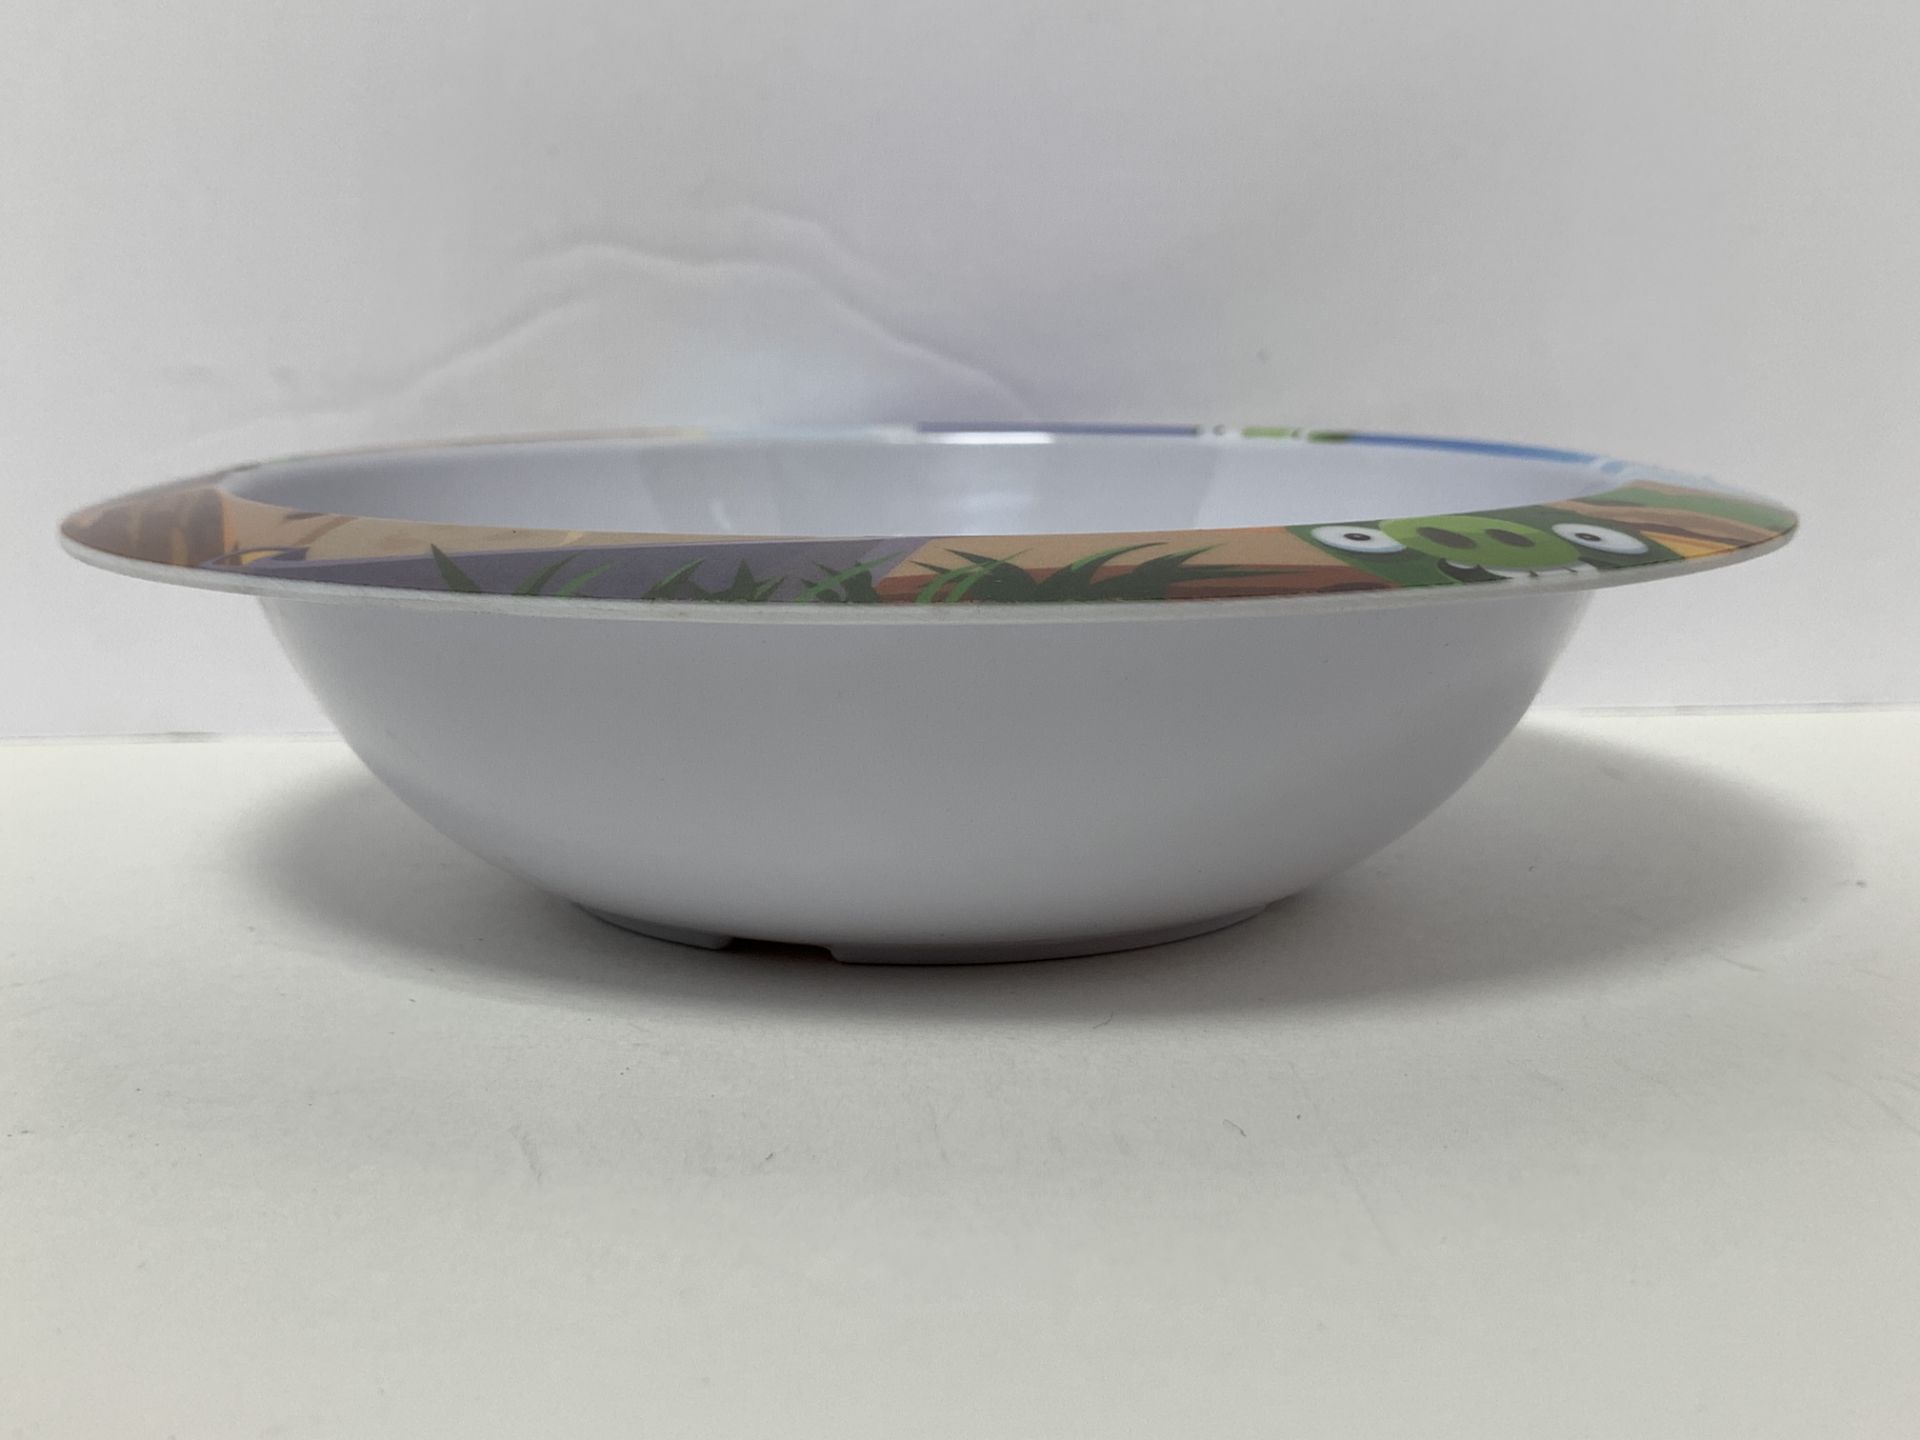 240 x Angry Birds Branded Melamine Bowls - Image 3 of 5